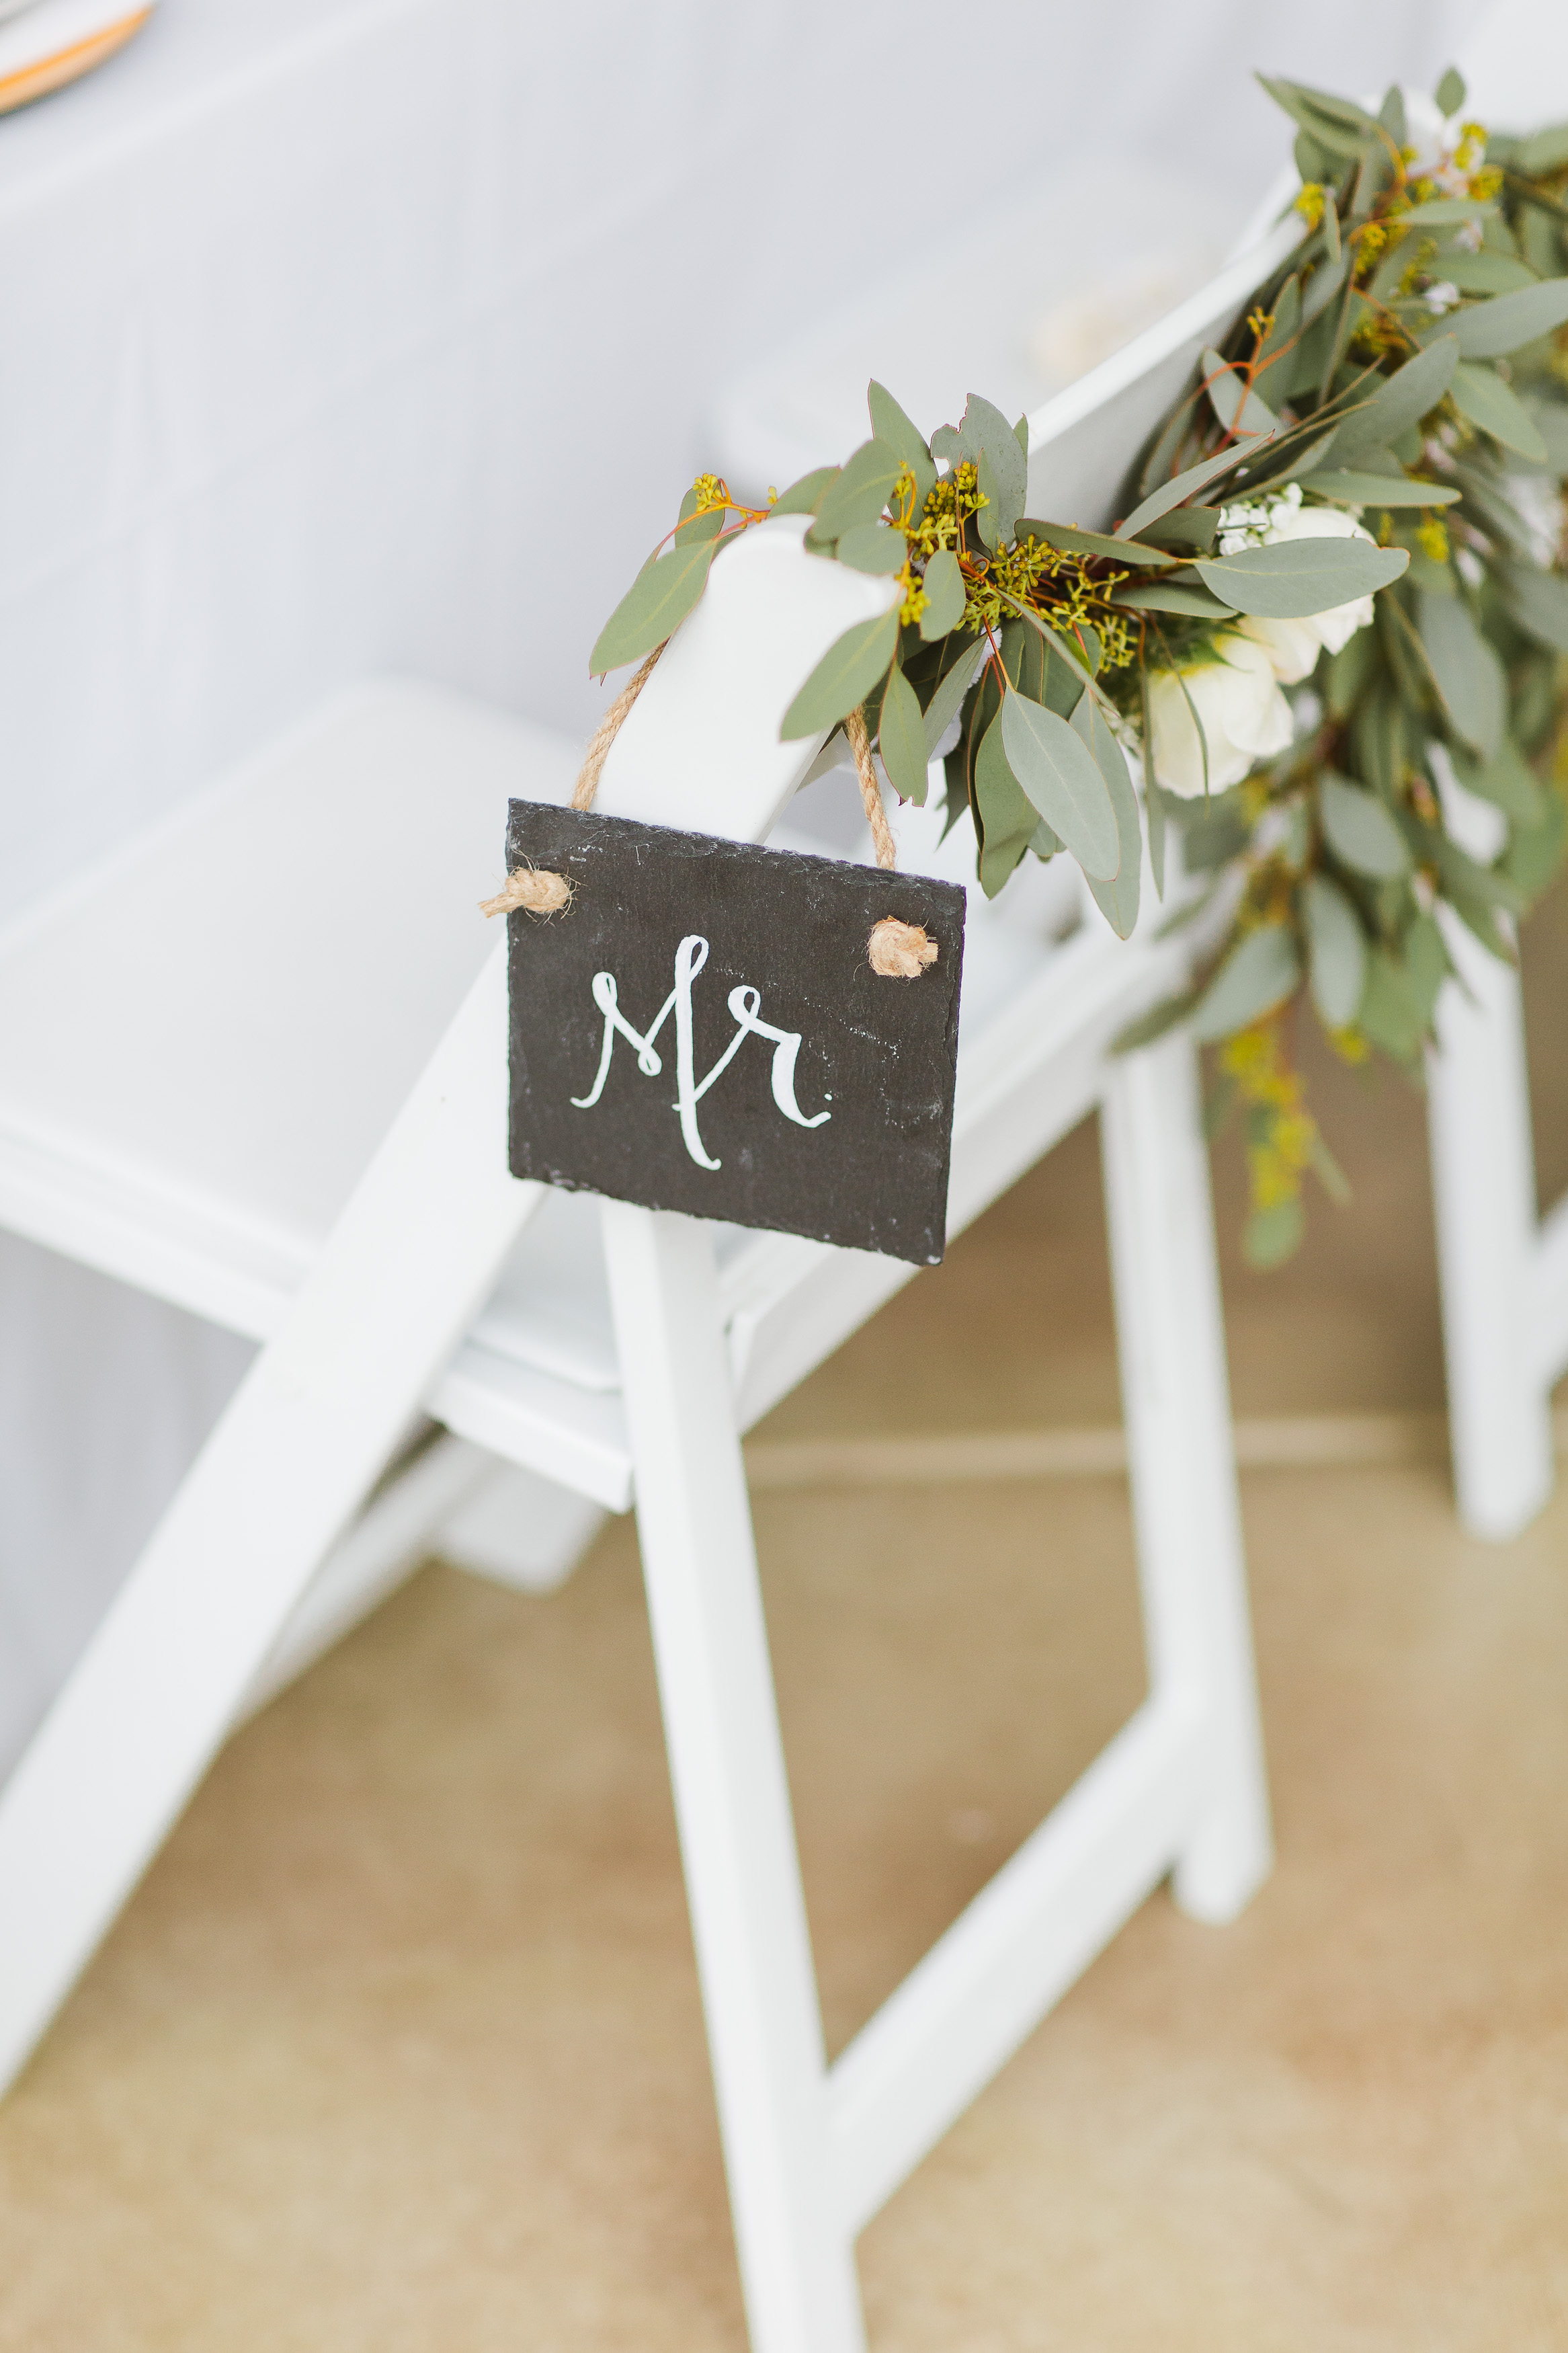 Mr and Mrs Chair Signage | Bride and Groom Chair Signs | Chalkboard Chair Signs | Asgari Photography | Swans Trail Farm Snohomish Wedding | Snohomish Wedding Planner | Seattle Wedding Planner